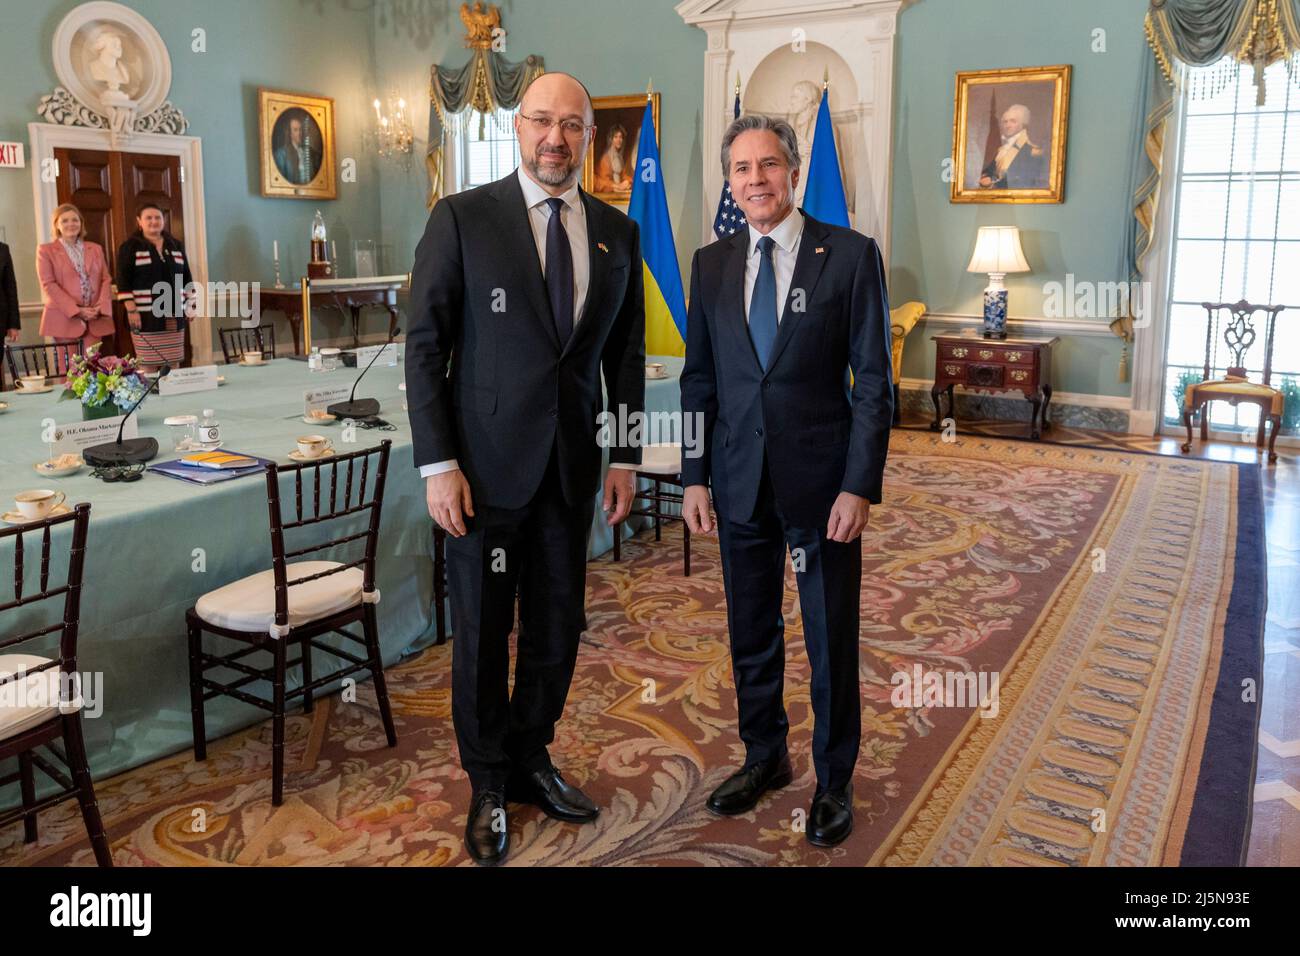 Secretary of State Antony J. Blinken meets with Ukrainian Prime Minister Denys Shmyhal at the U.S. Department of State in Washington, D.C., on April 22, 2022. [State Department photo by Ron Przysucha) Stock Photo